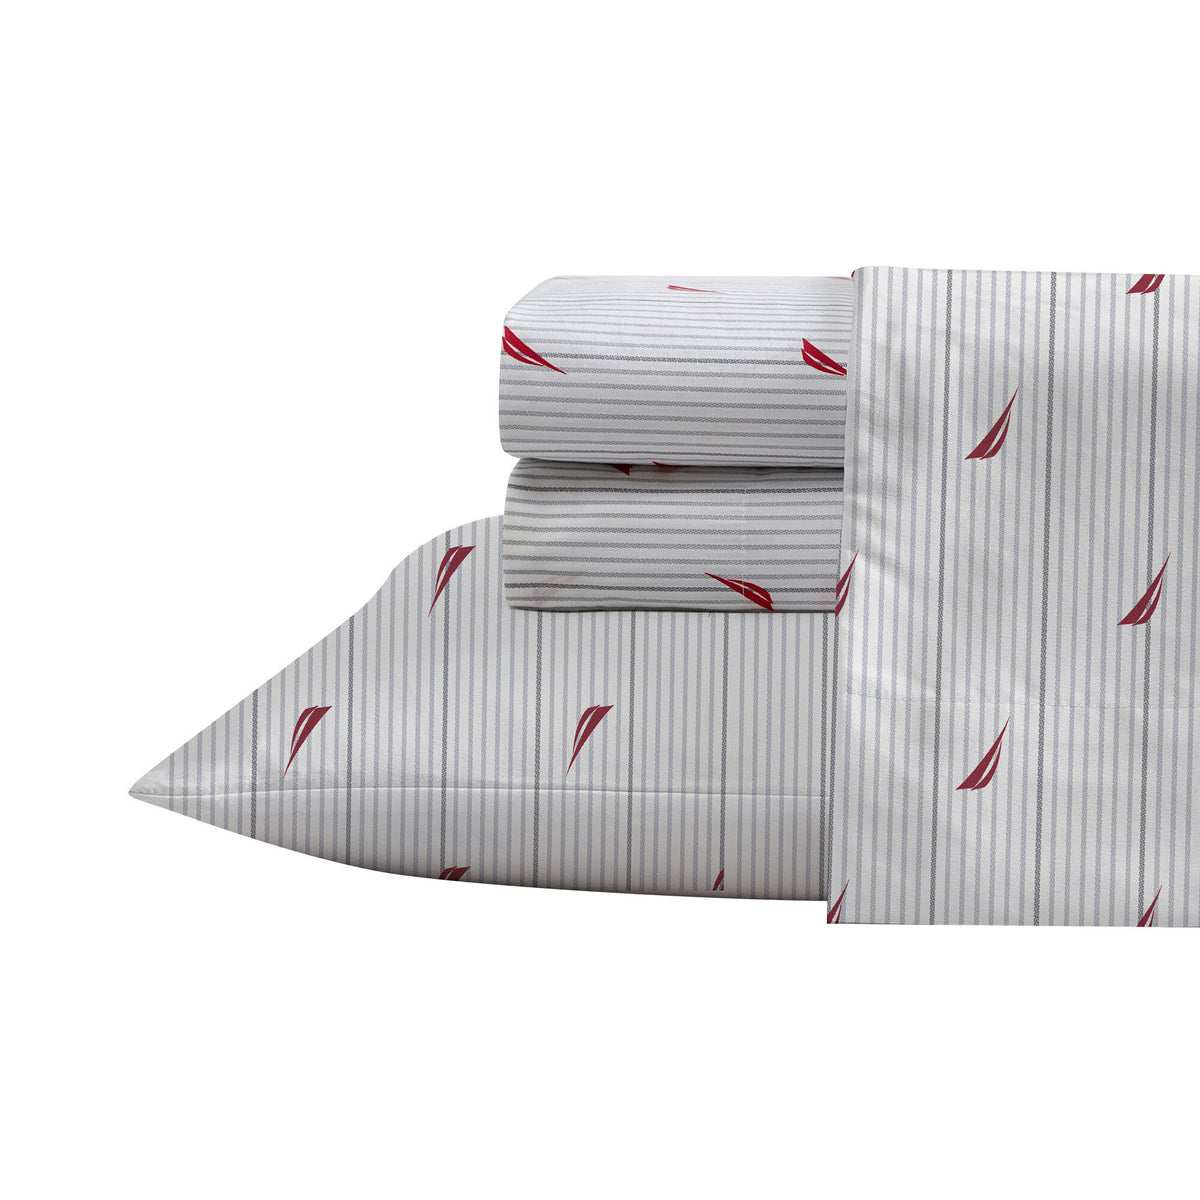 Nautica Audley Striped Red King Sheet Set Tango Red